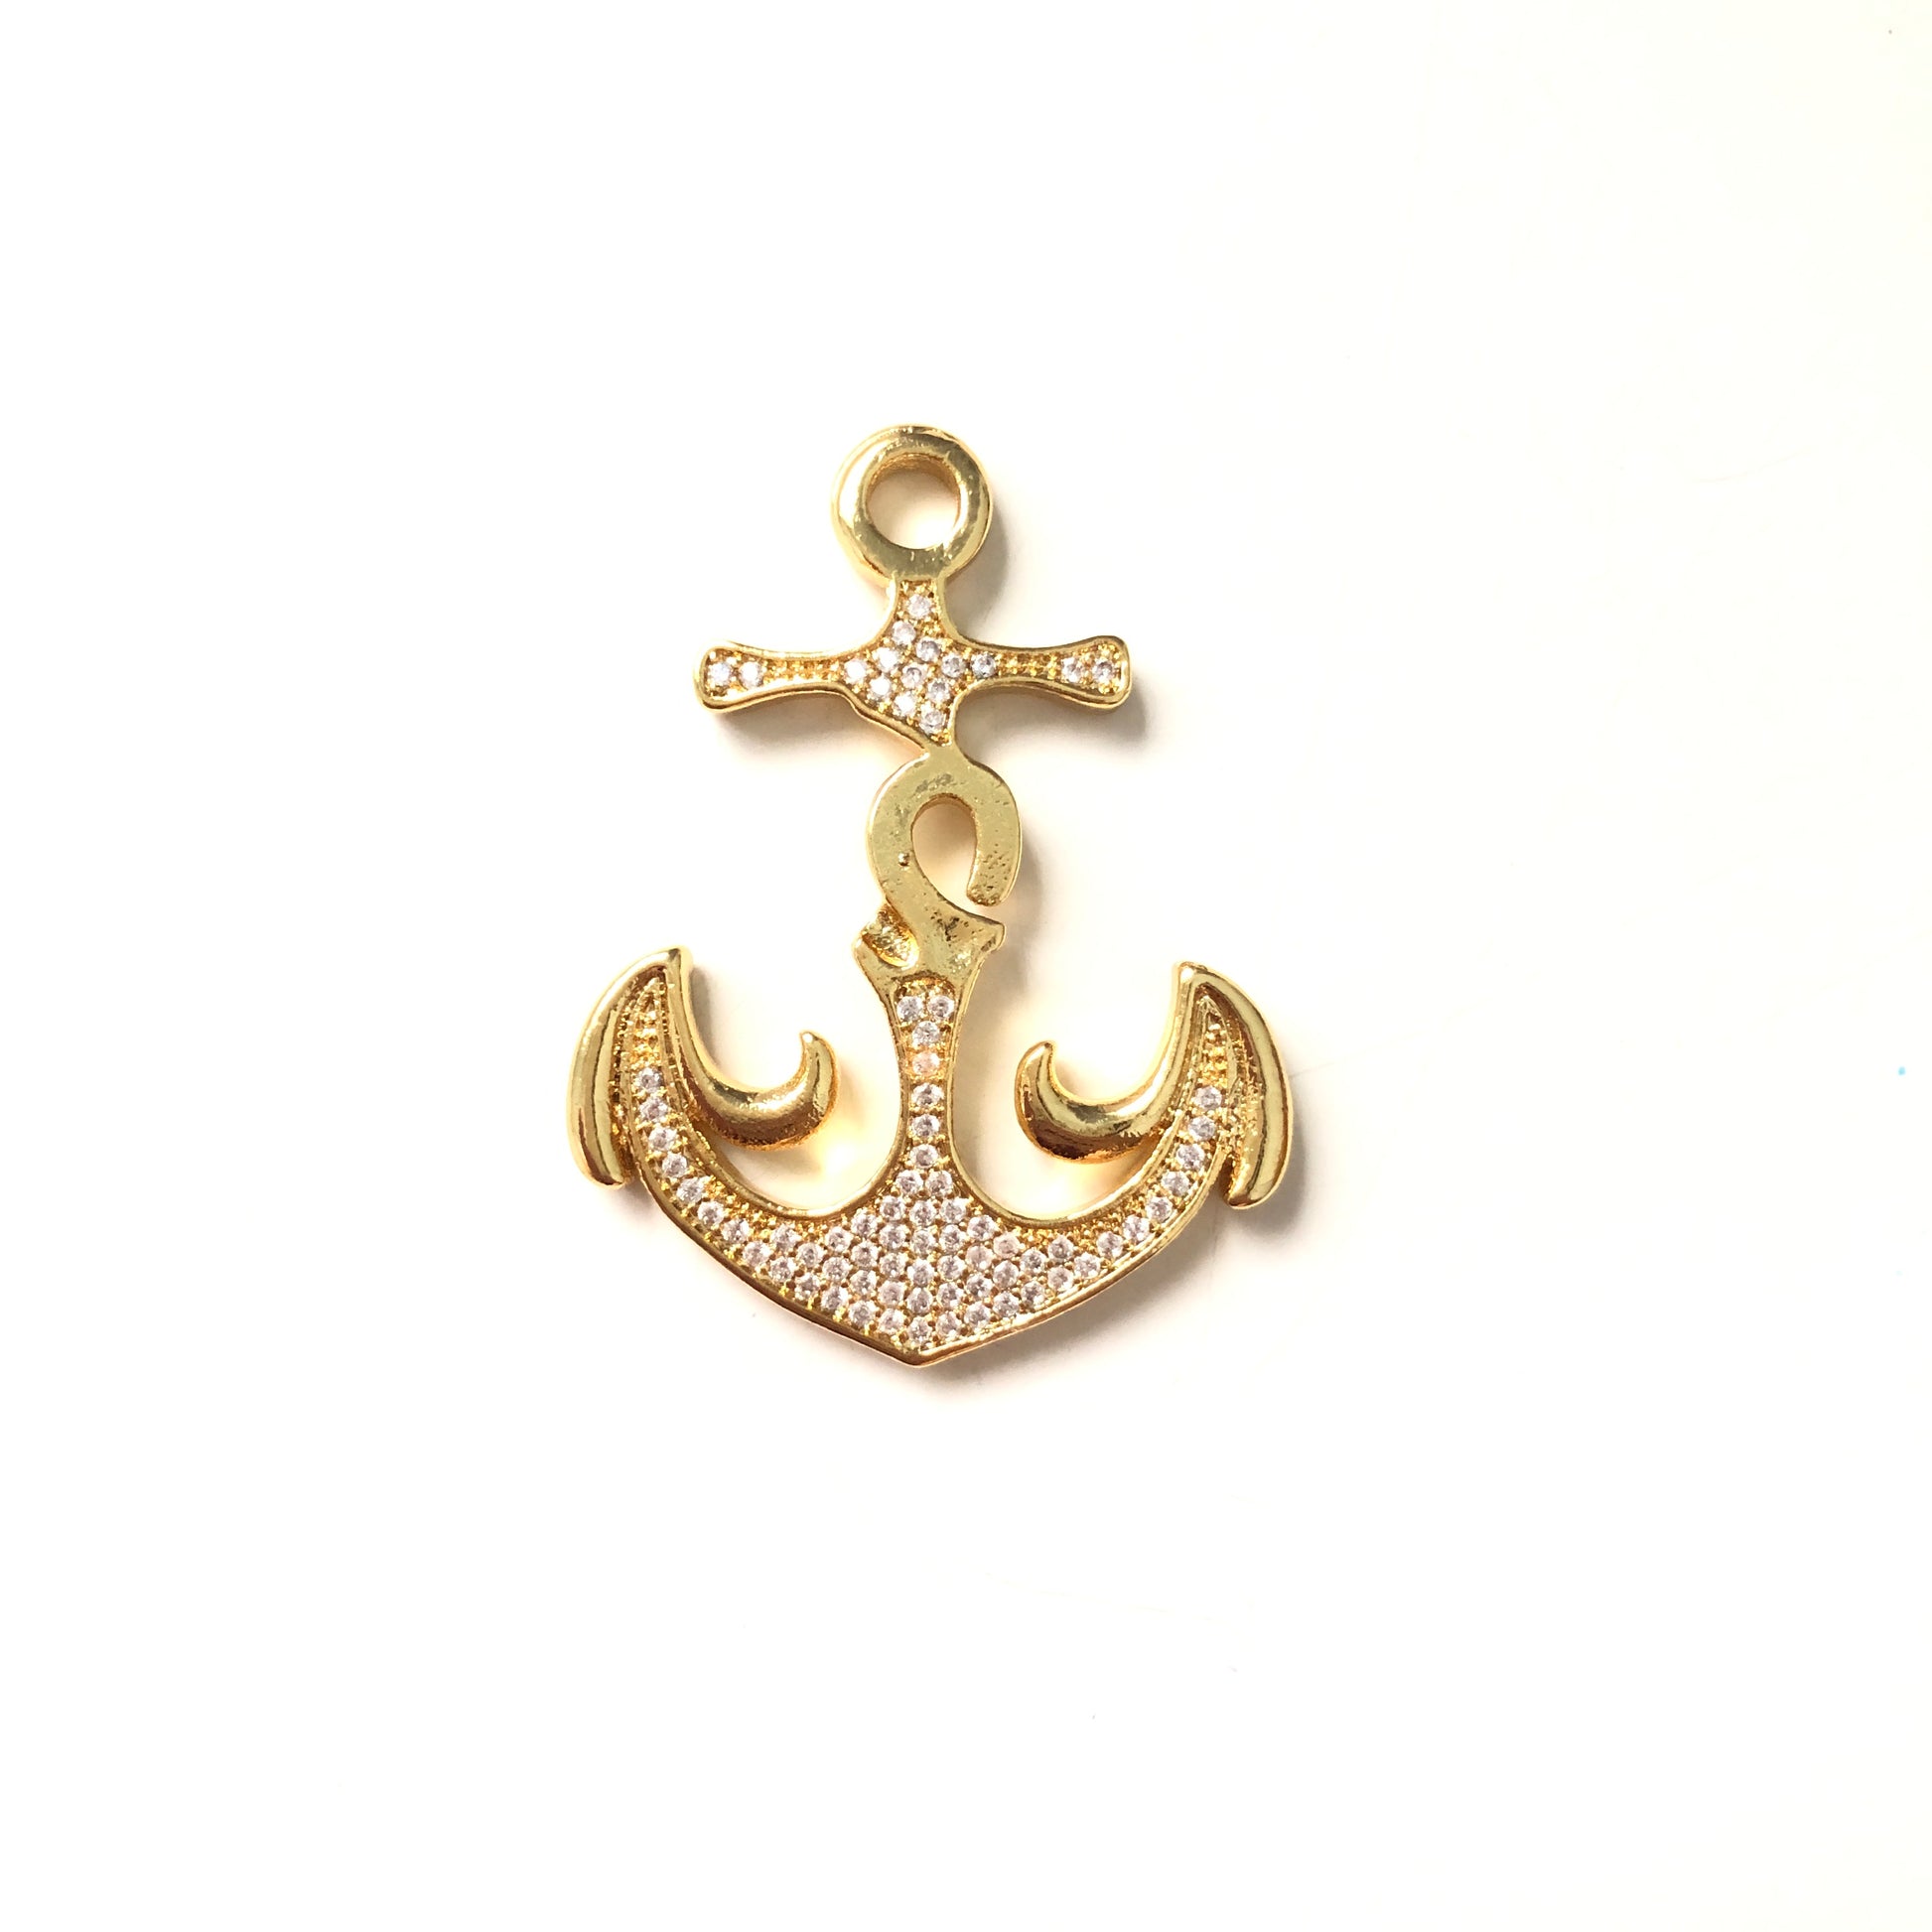 10pcs/lot 40*31mm CZ Paved Anchor Charms Gold CZ Paved Charms Large Sizes Symbols Charms Beads Beyond